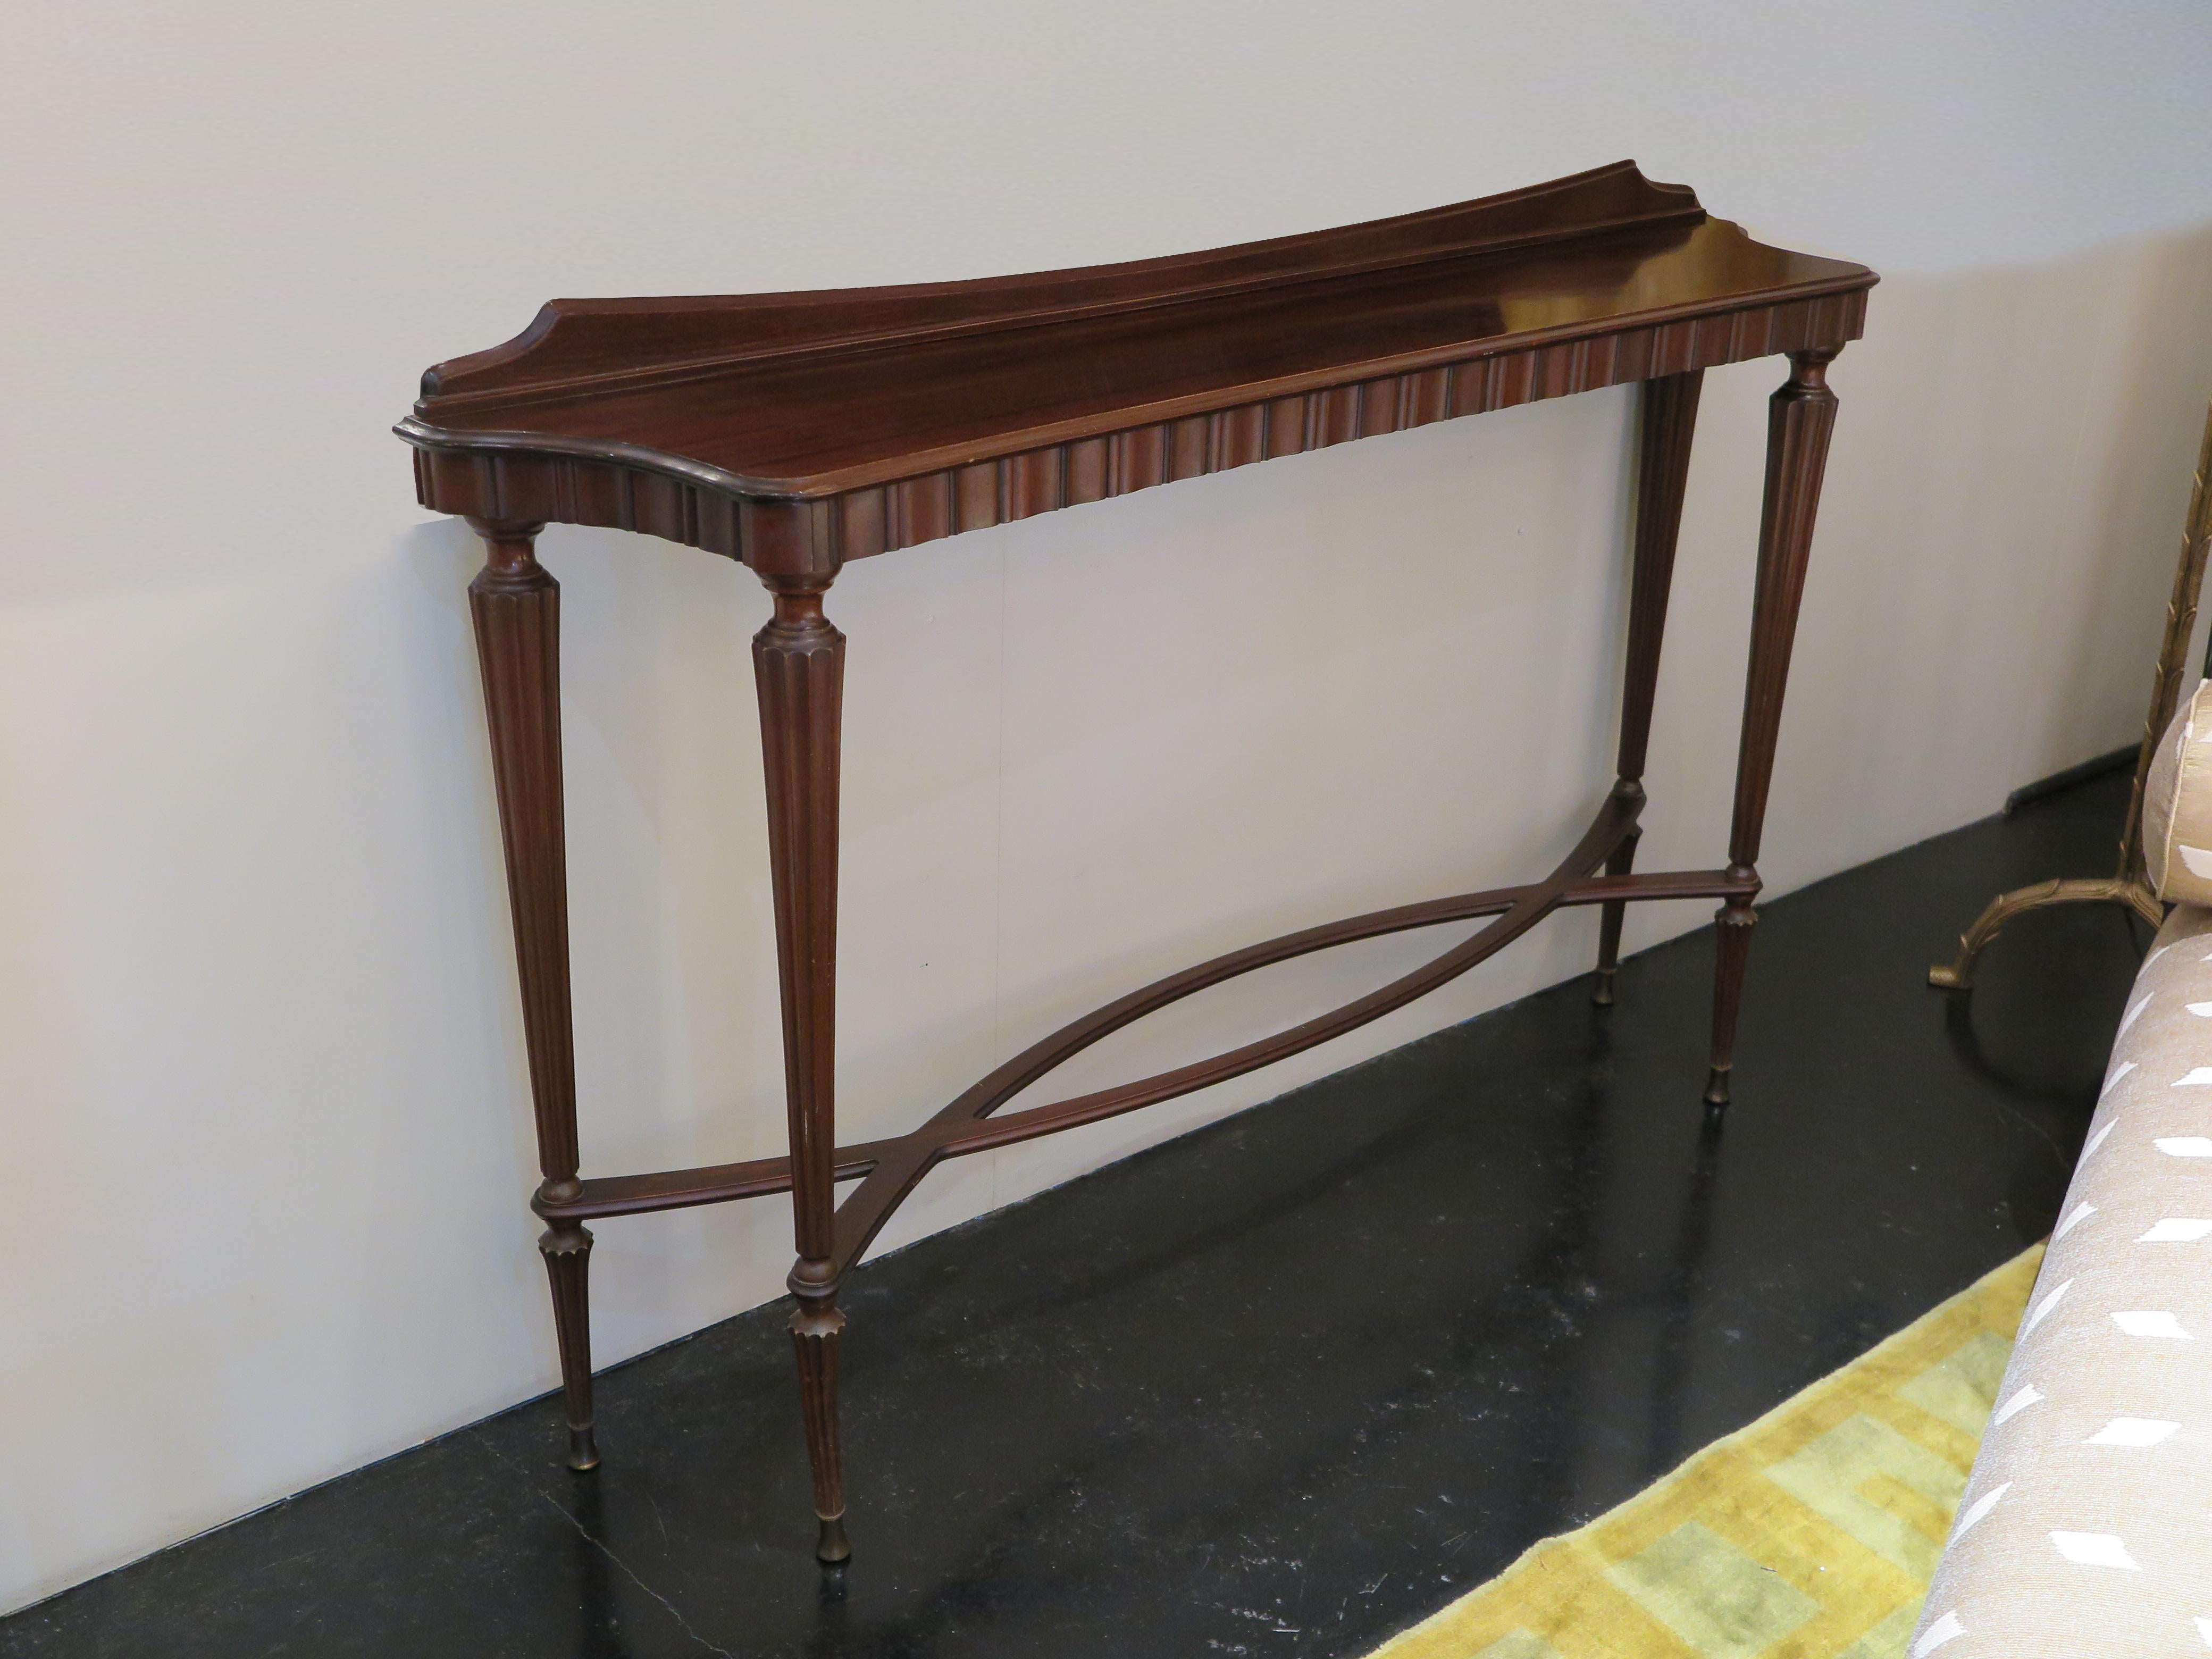 Italian Mid-Century console in mahogany with beautiful fluted detailing along facade and sides. Four ribbed tapered legs support the delicate frame. The original brass hardware adds the finishing touch. The back plate along the top of the console is